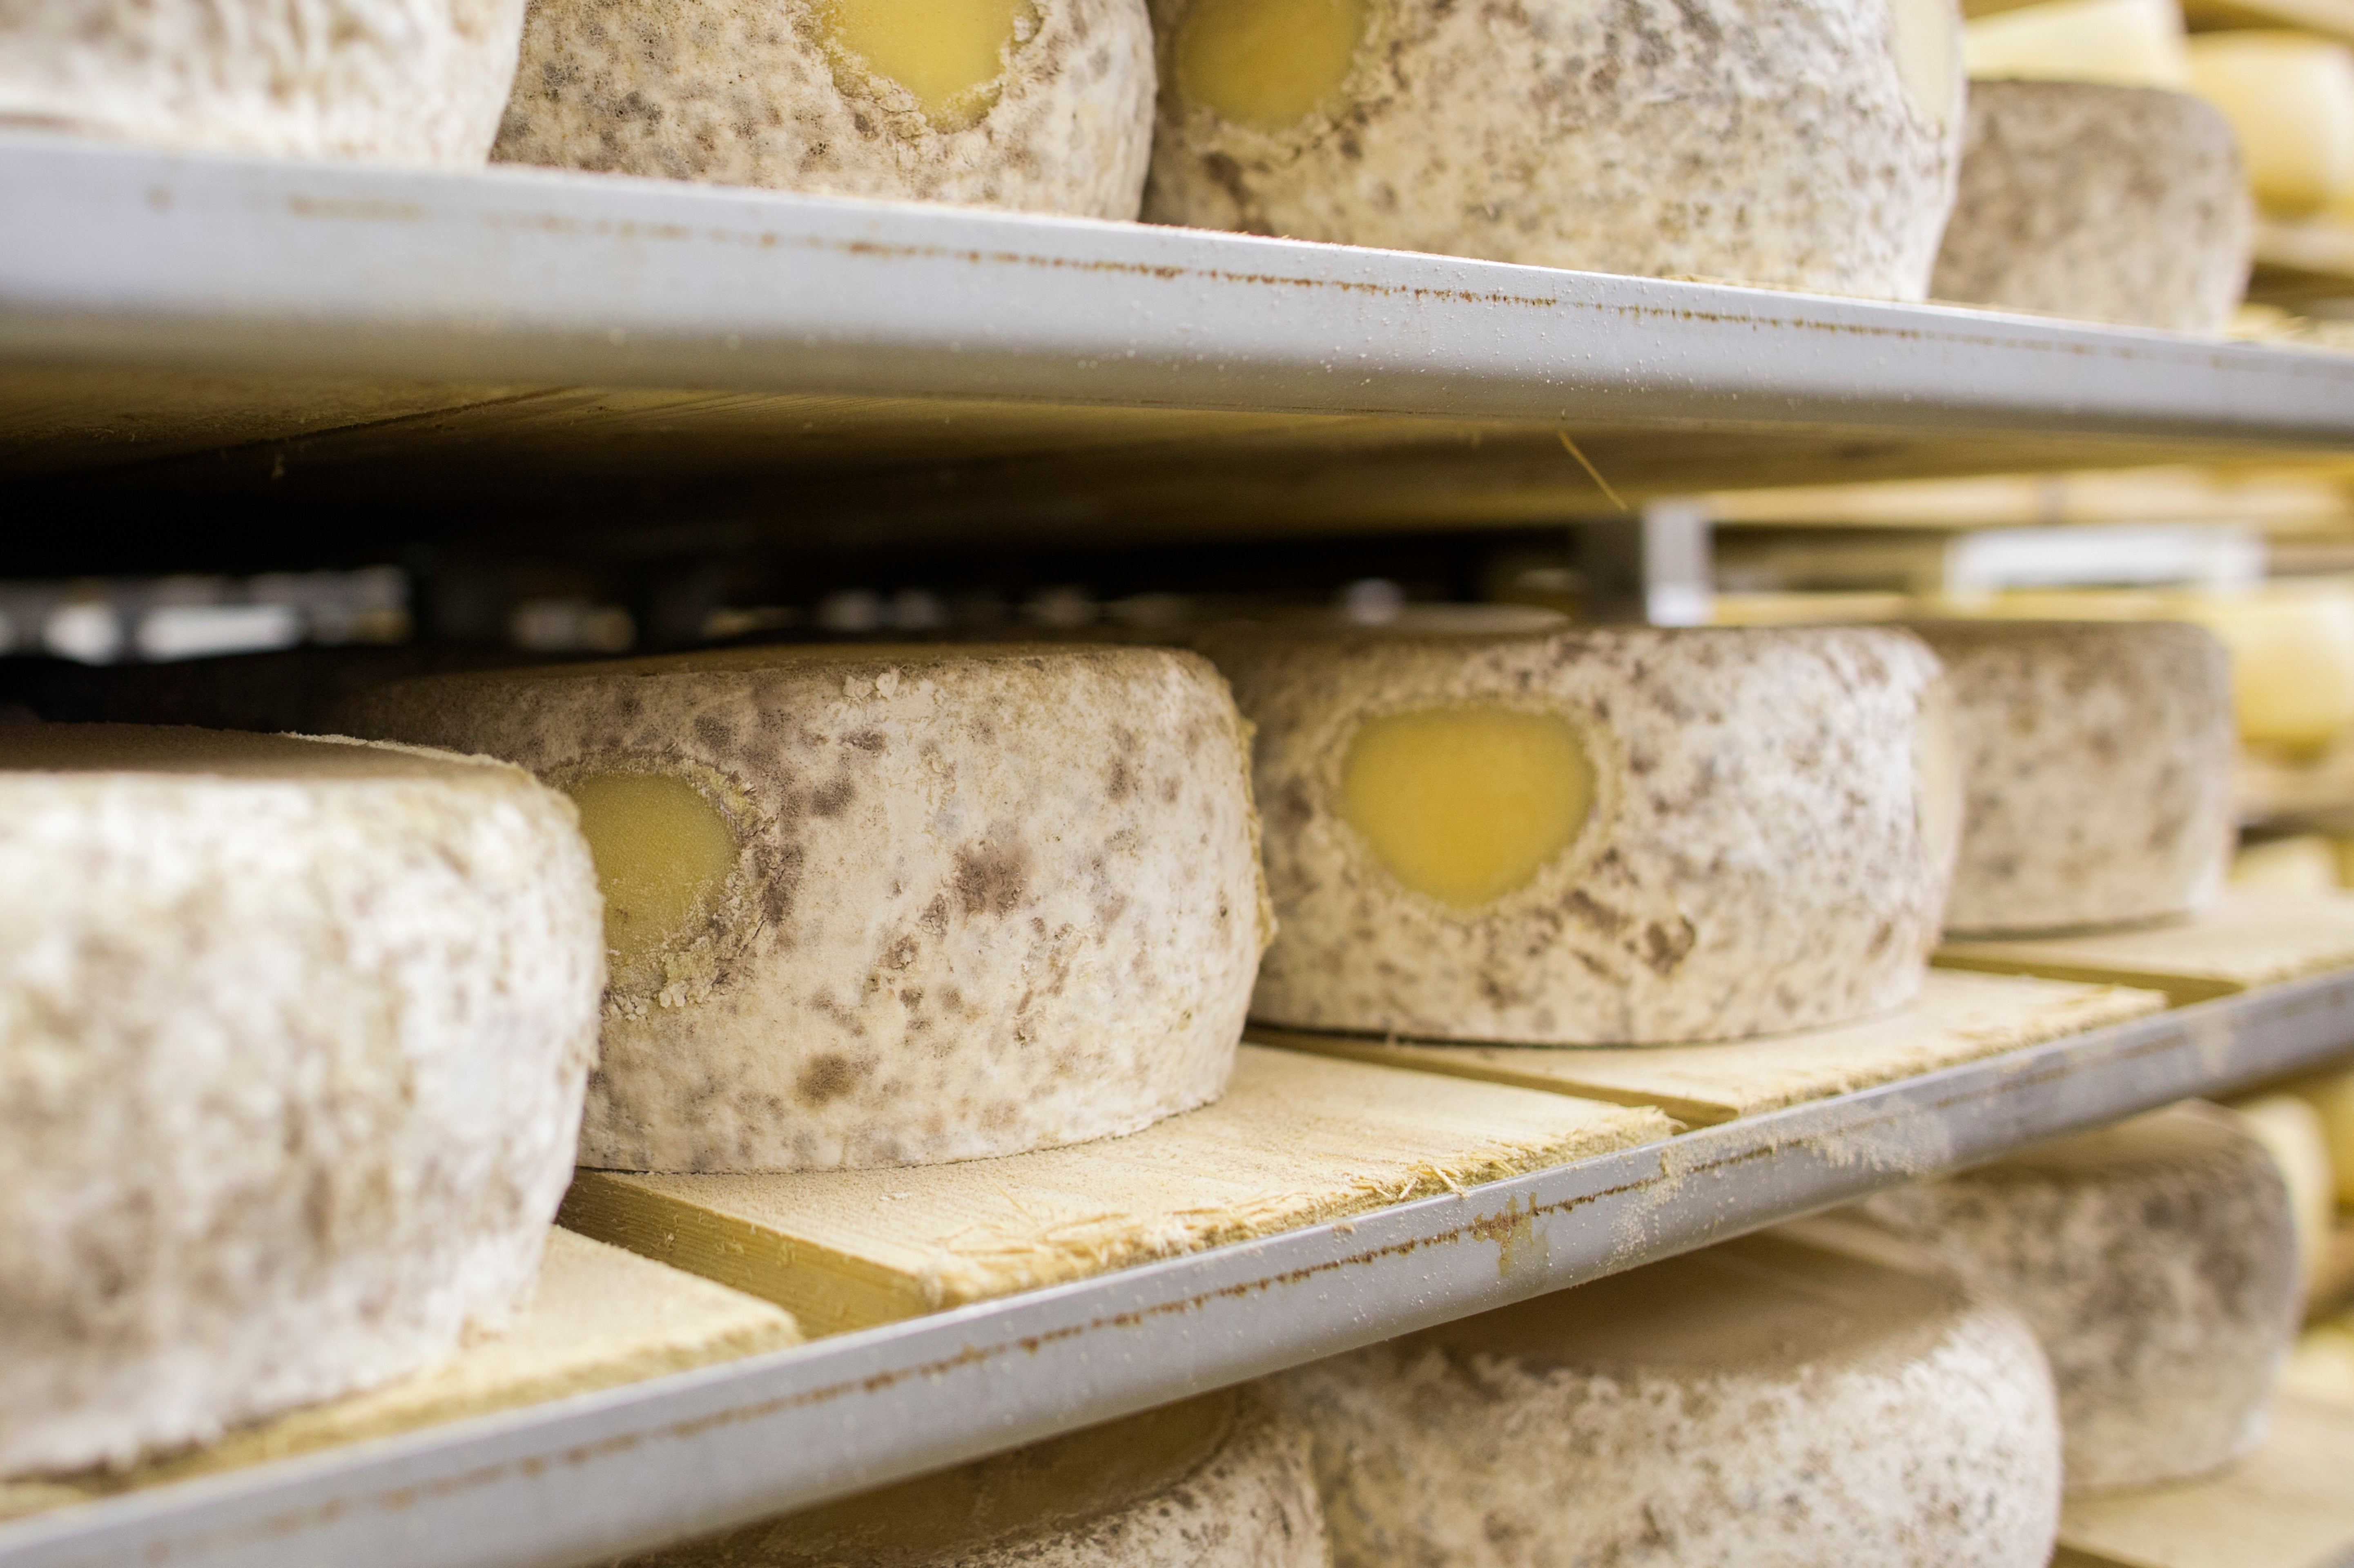 Head to the island of Pag for delicious sheep’s milk cheese